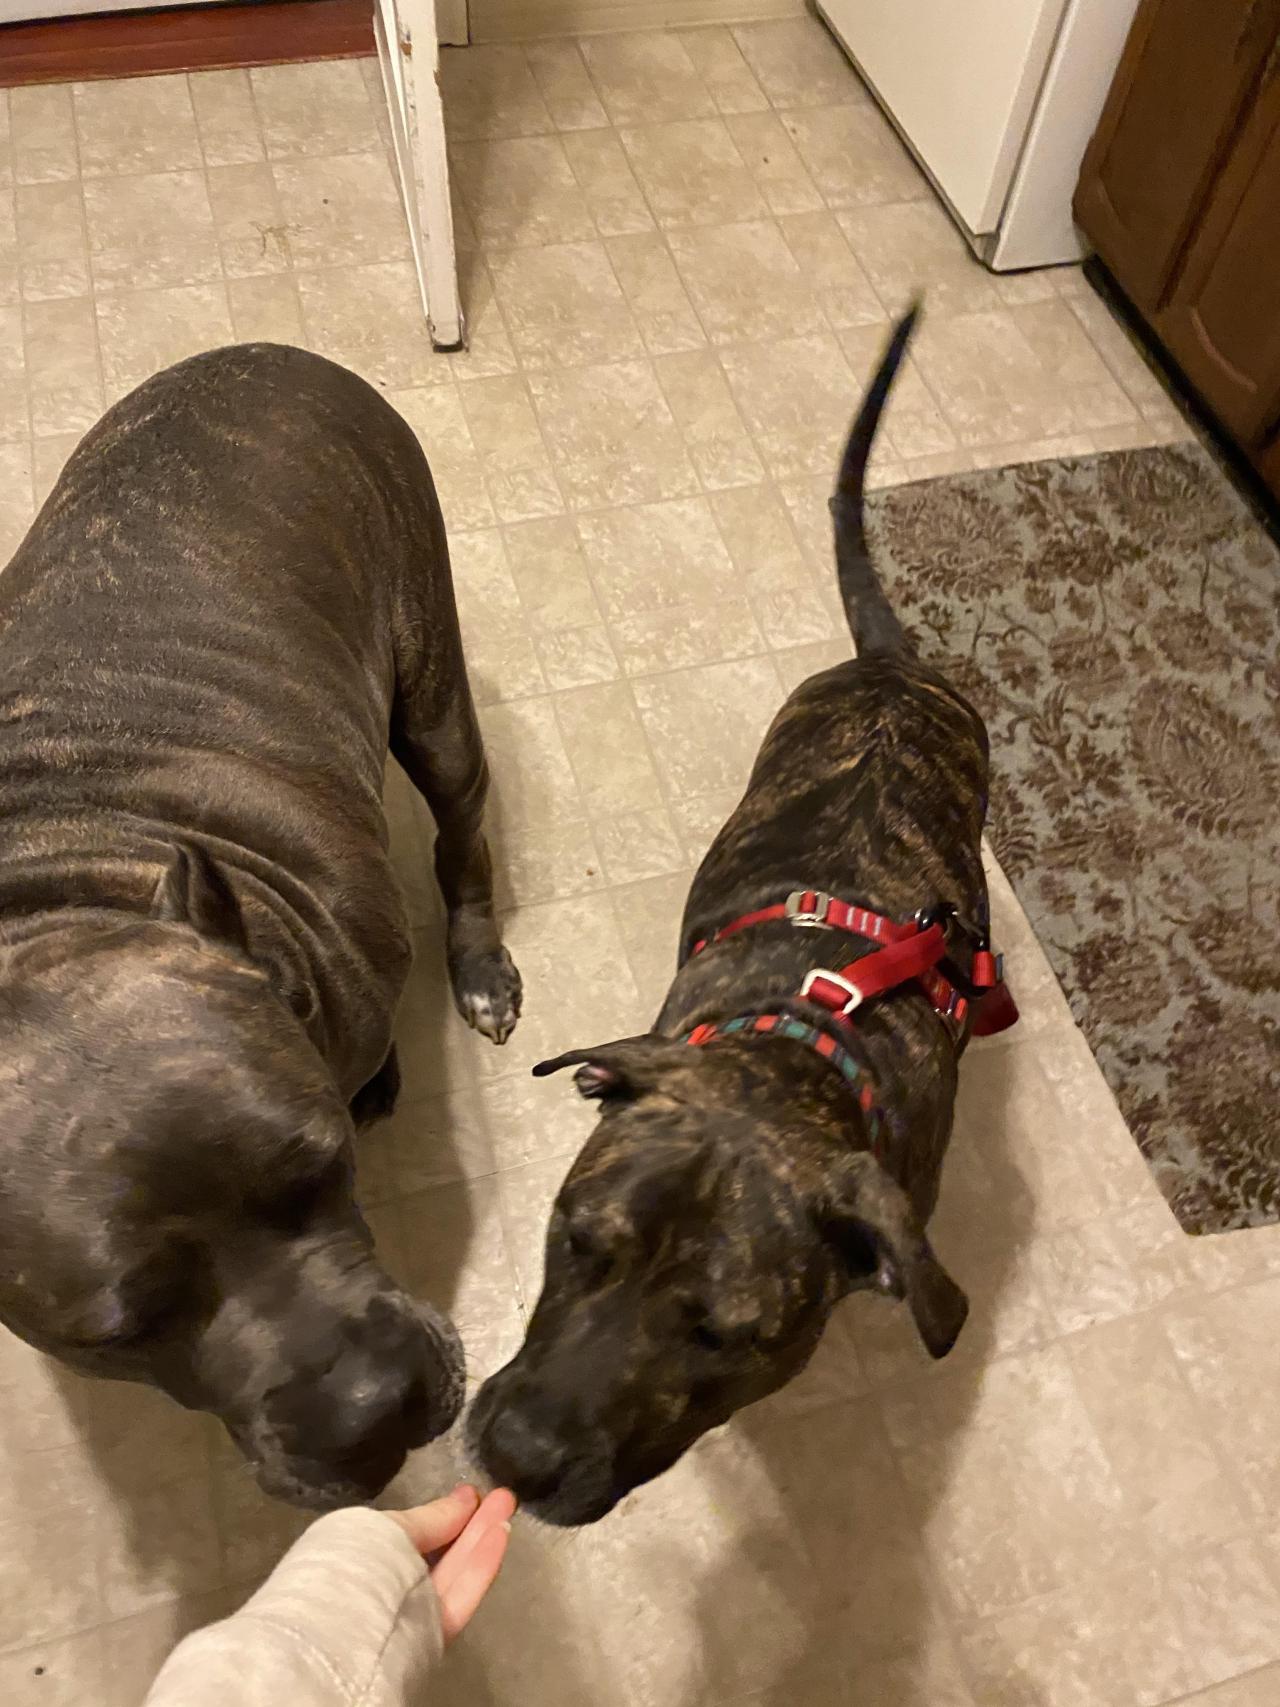 Big dog on right (65lbs) meets even bigger dog on left (135lbs)